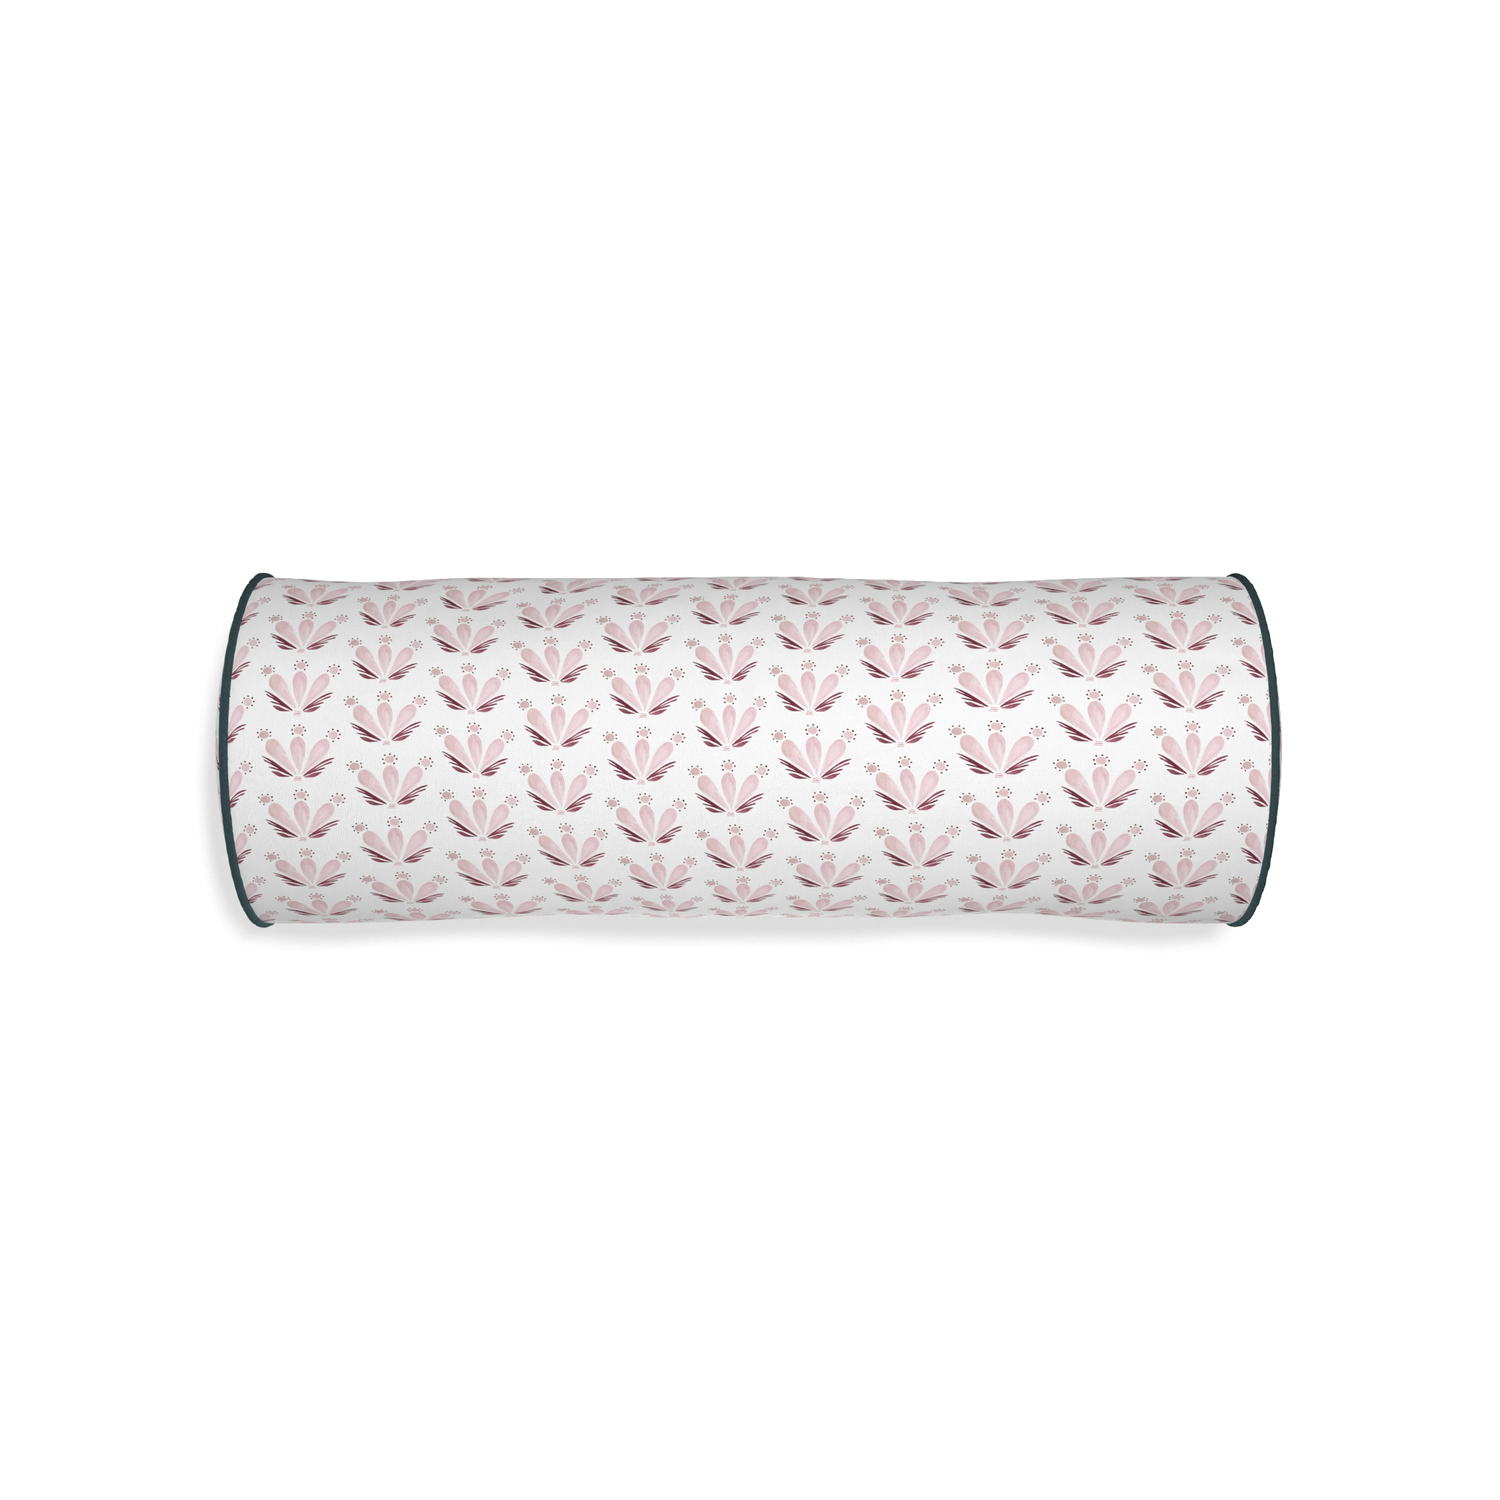 Bolster serena pink custom pink & burgundy drop repeat floralpillow with p piping on white background